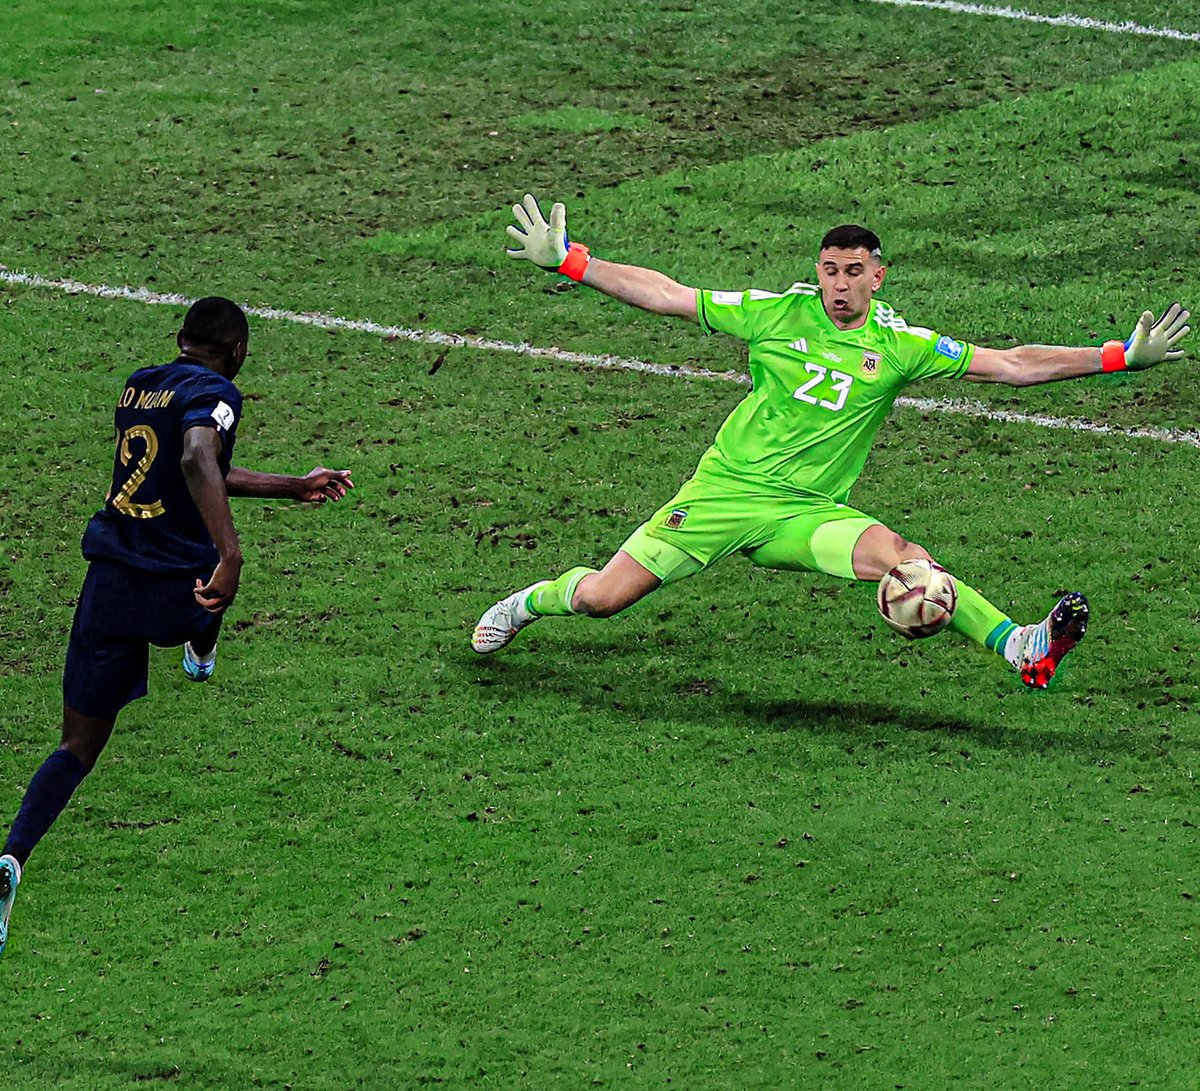 @goal The save of the century by @emimartinezz1 #FIFAWorldCupfinal